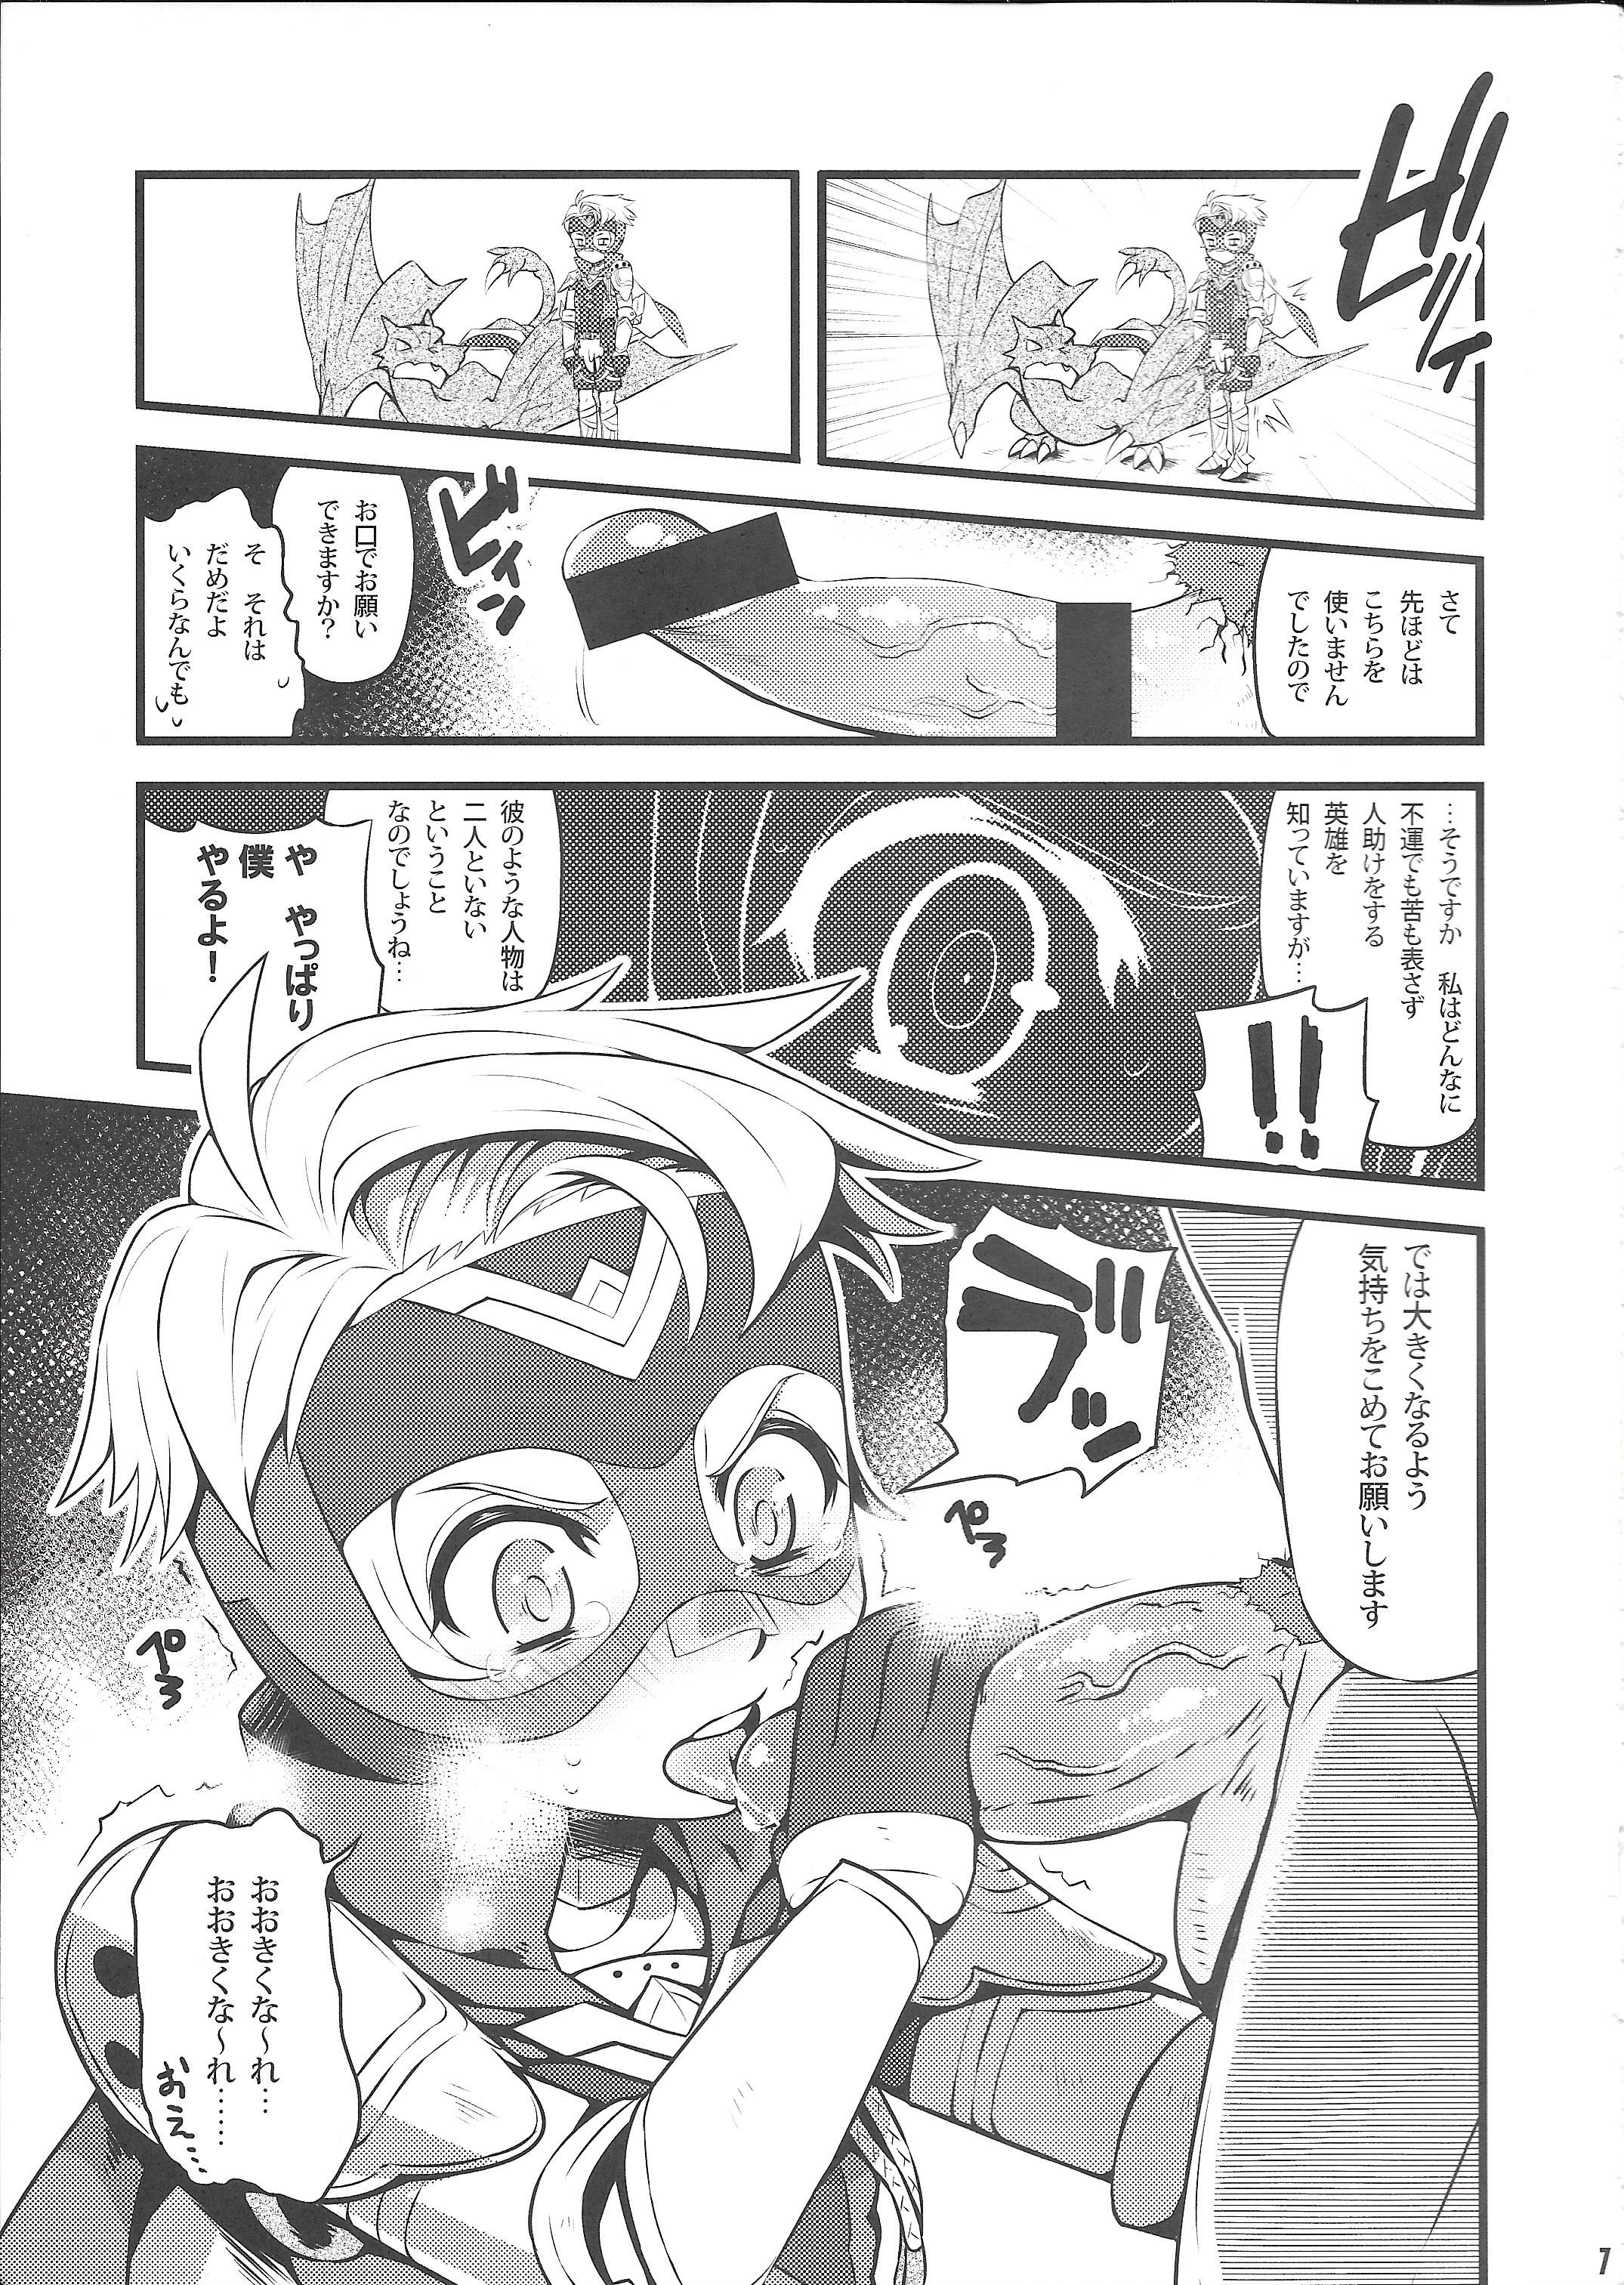 Teenxxx September 5 to 8 - Fire emblem if Toy - Page 6